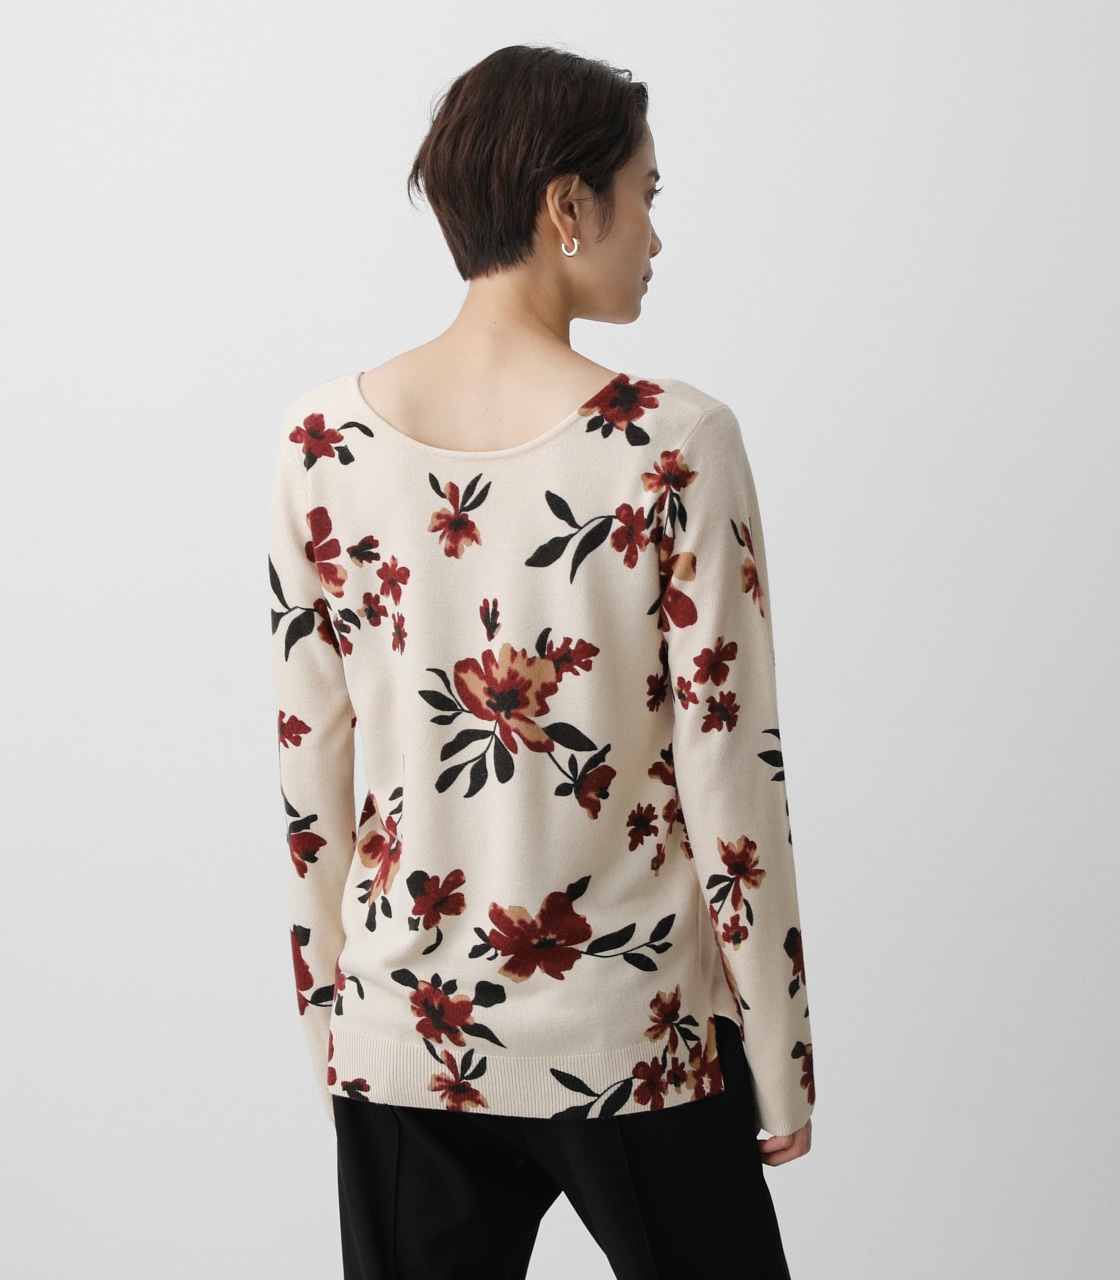 NUDIE 2WAY FLOWER KNIT TOPS/ヌーディー2WAYフラワーニットトップス 詳細画像 柄RED 7